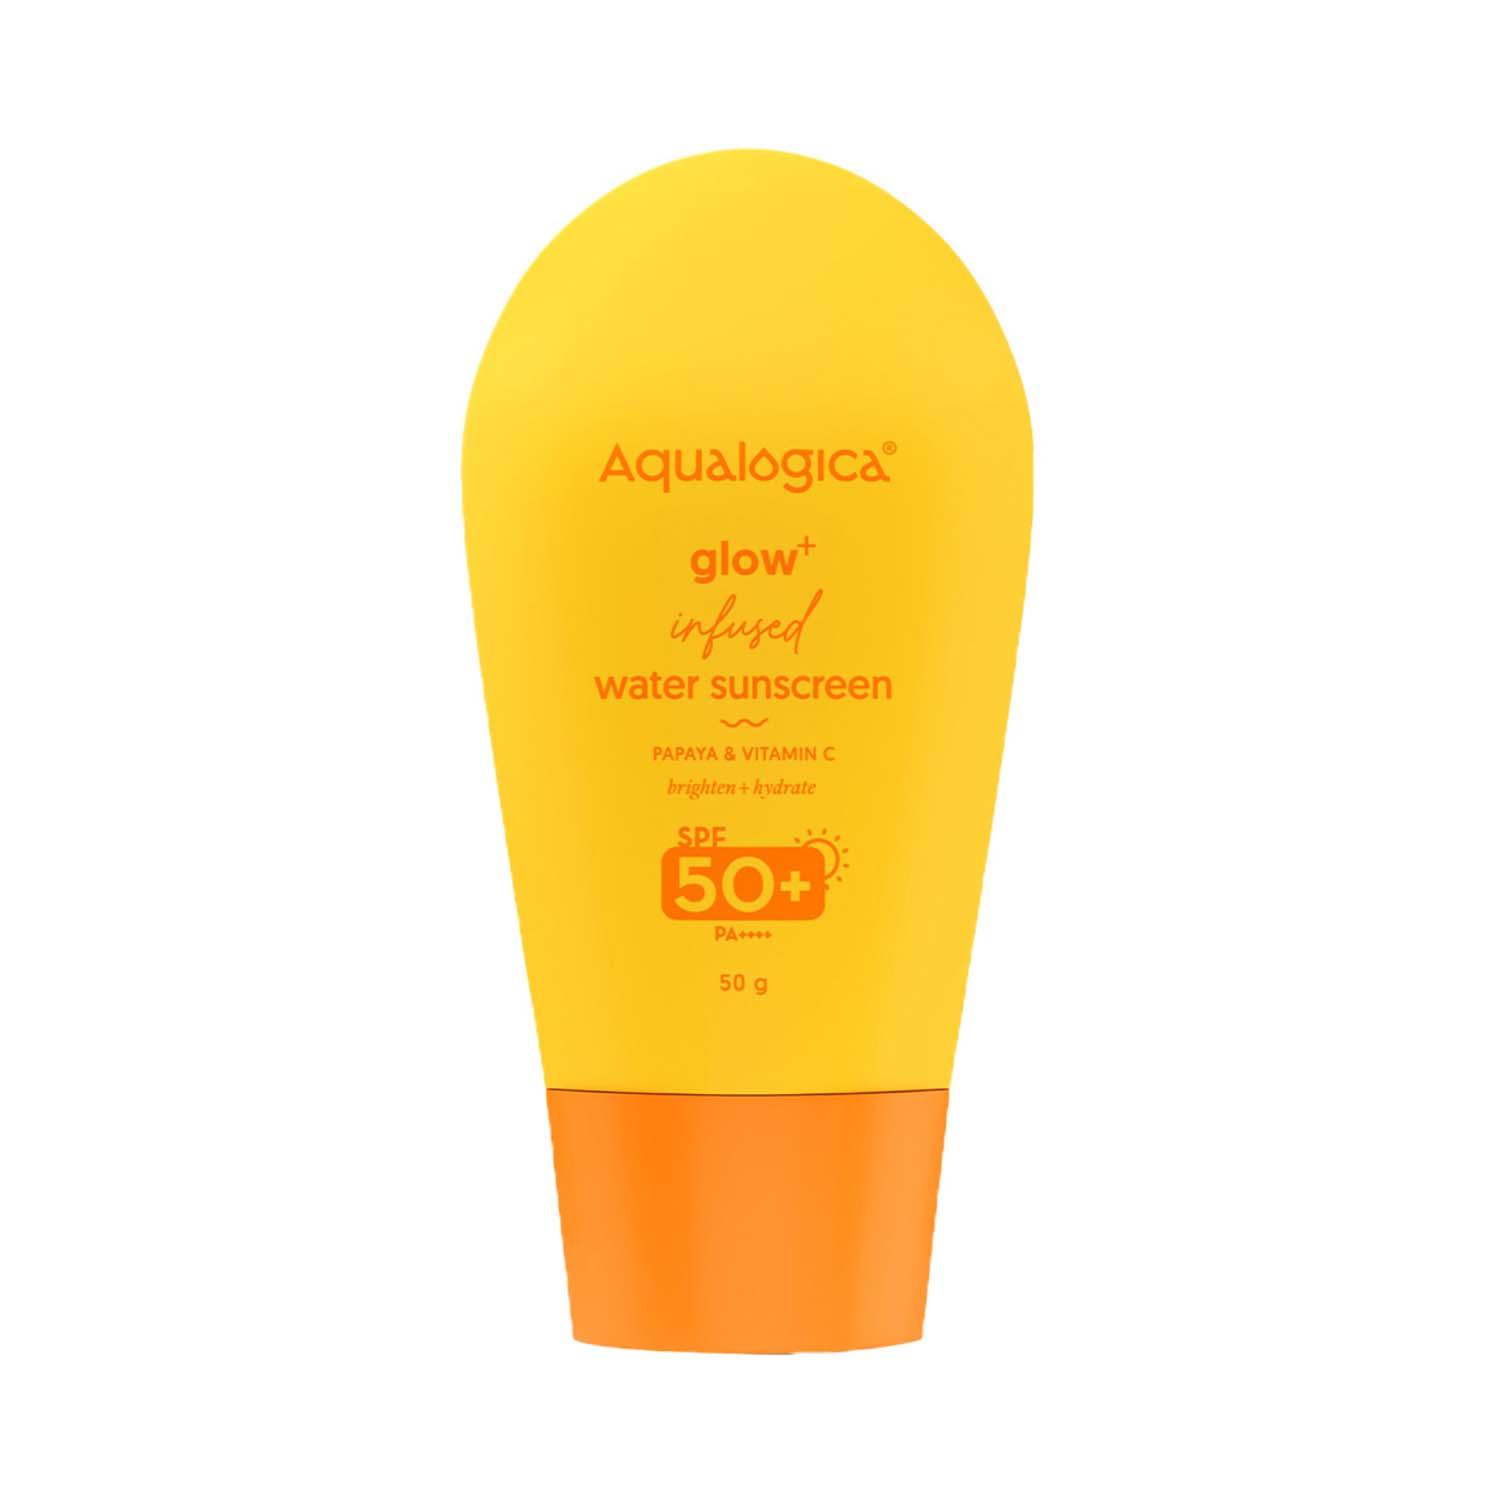 Aqualogica Glow+ Infused Water Sunscreen With SPF 50+ PA++++ (50 g)